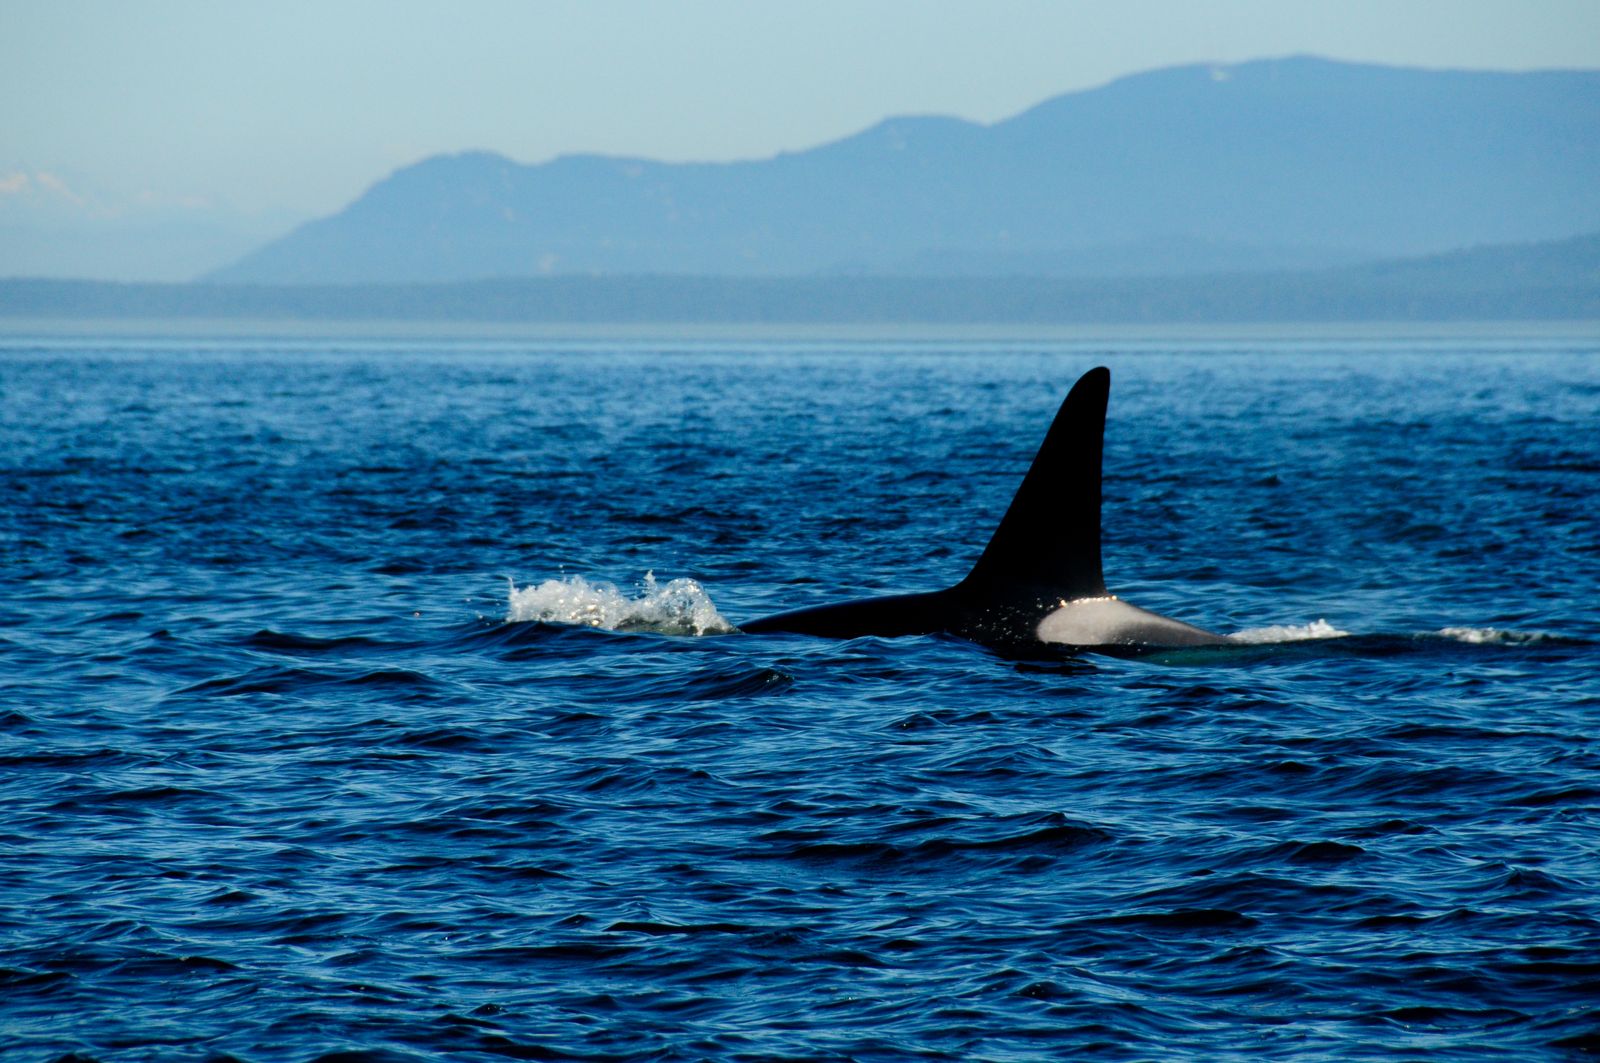 Two New Species of Killer Whale Should Be Recognized, Study Says